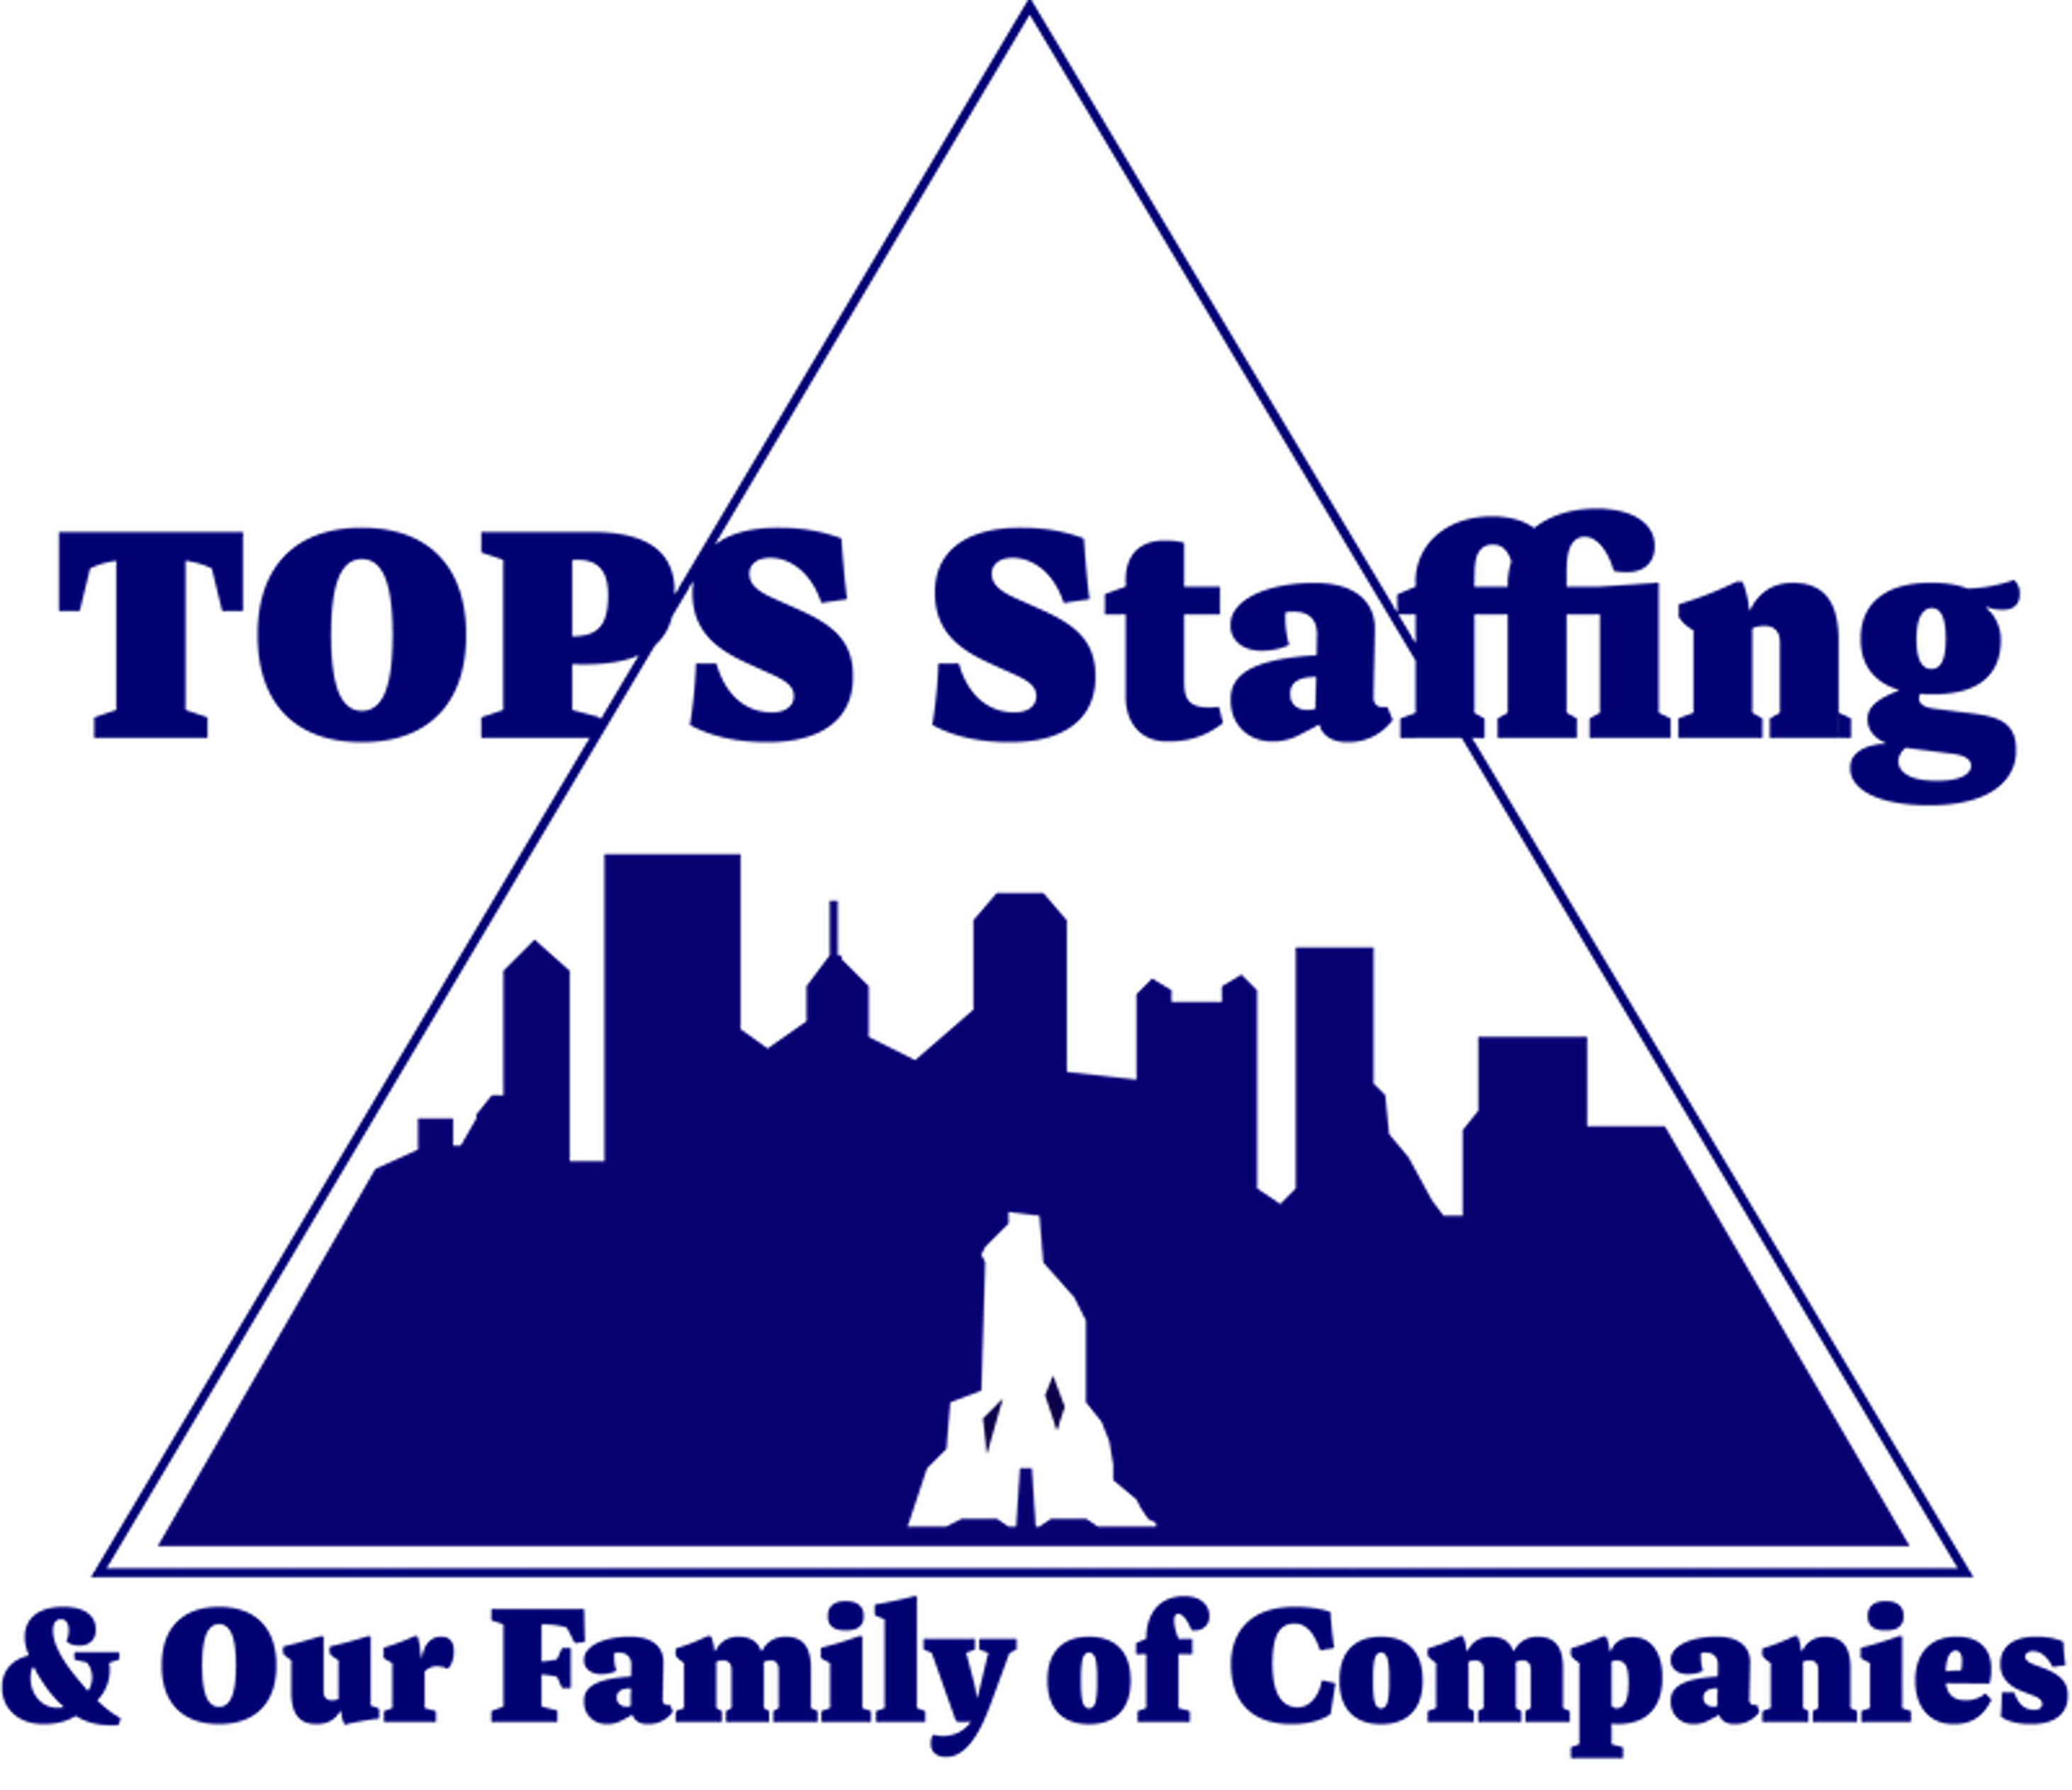 TOPS Staffing & Our Family of Companies